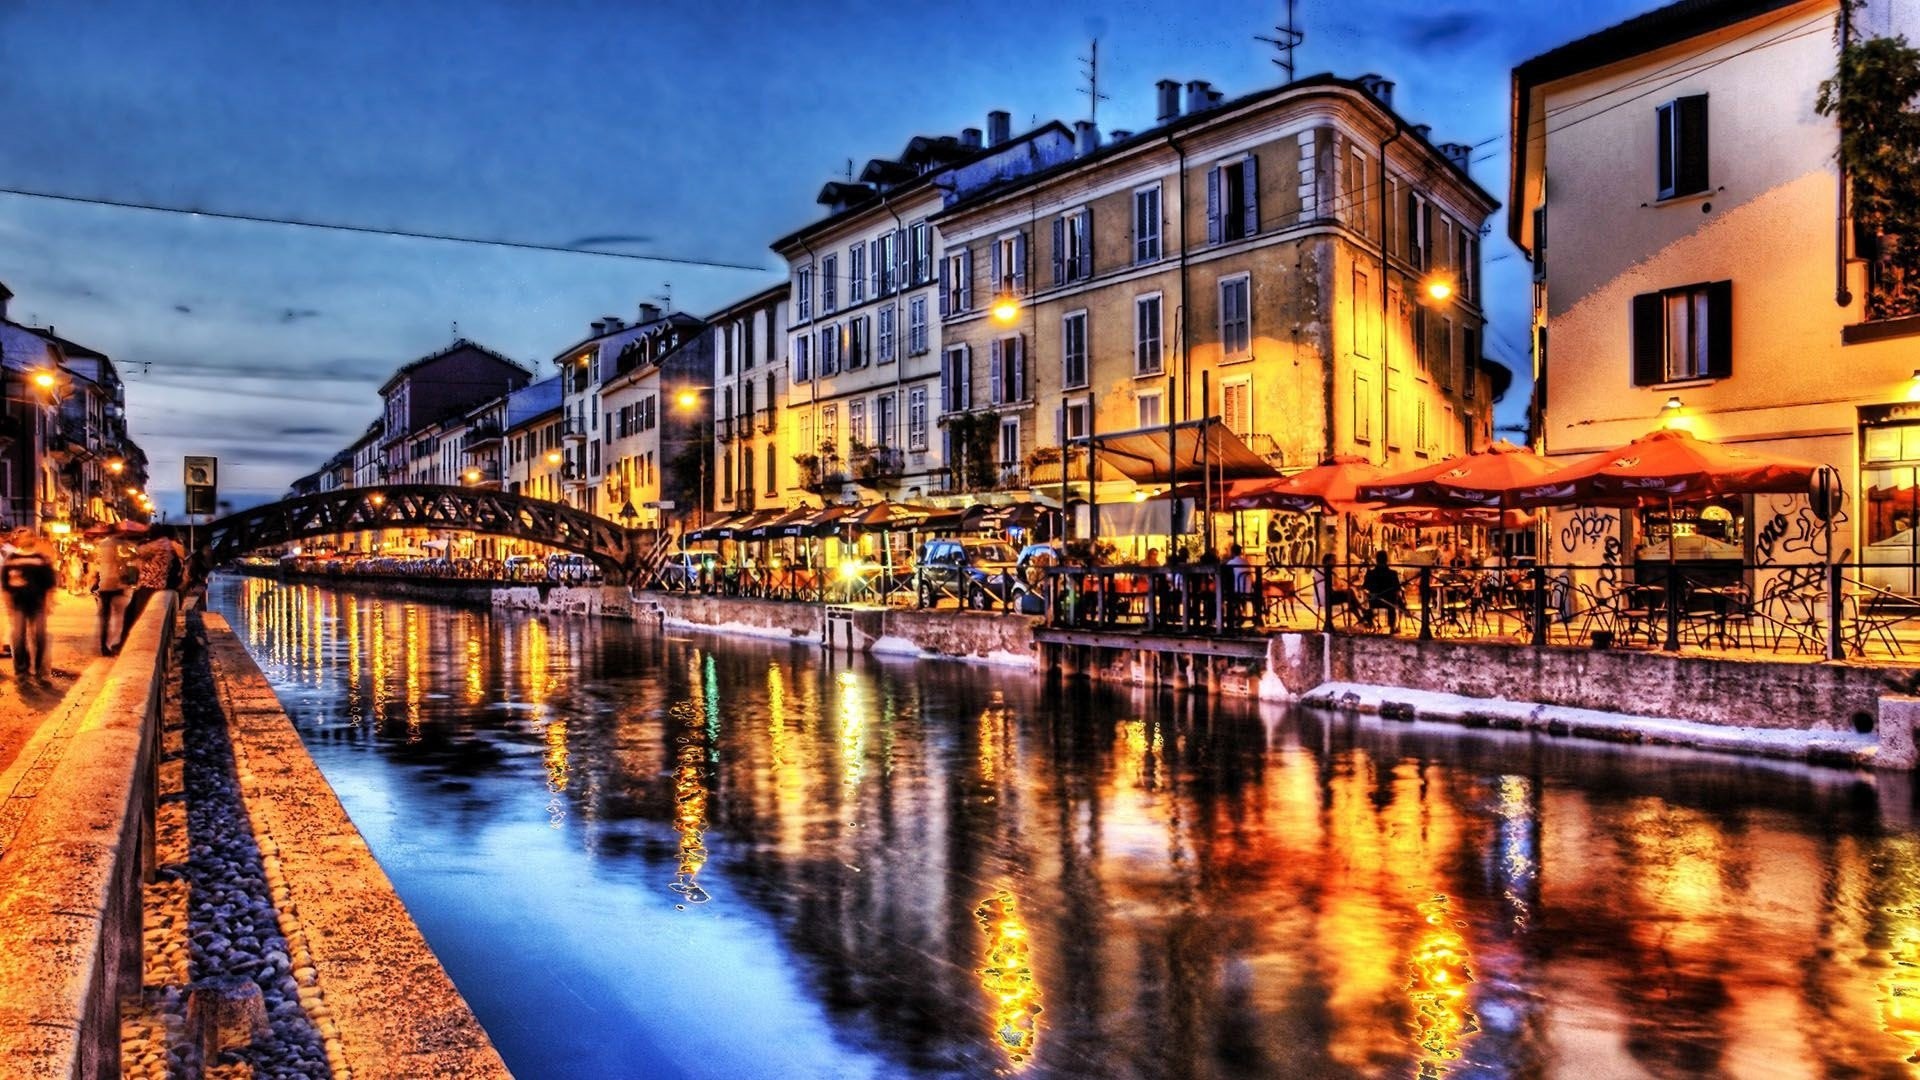 1920x1080 Italy At Night Wallpaper Mobile